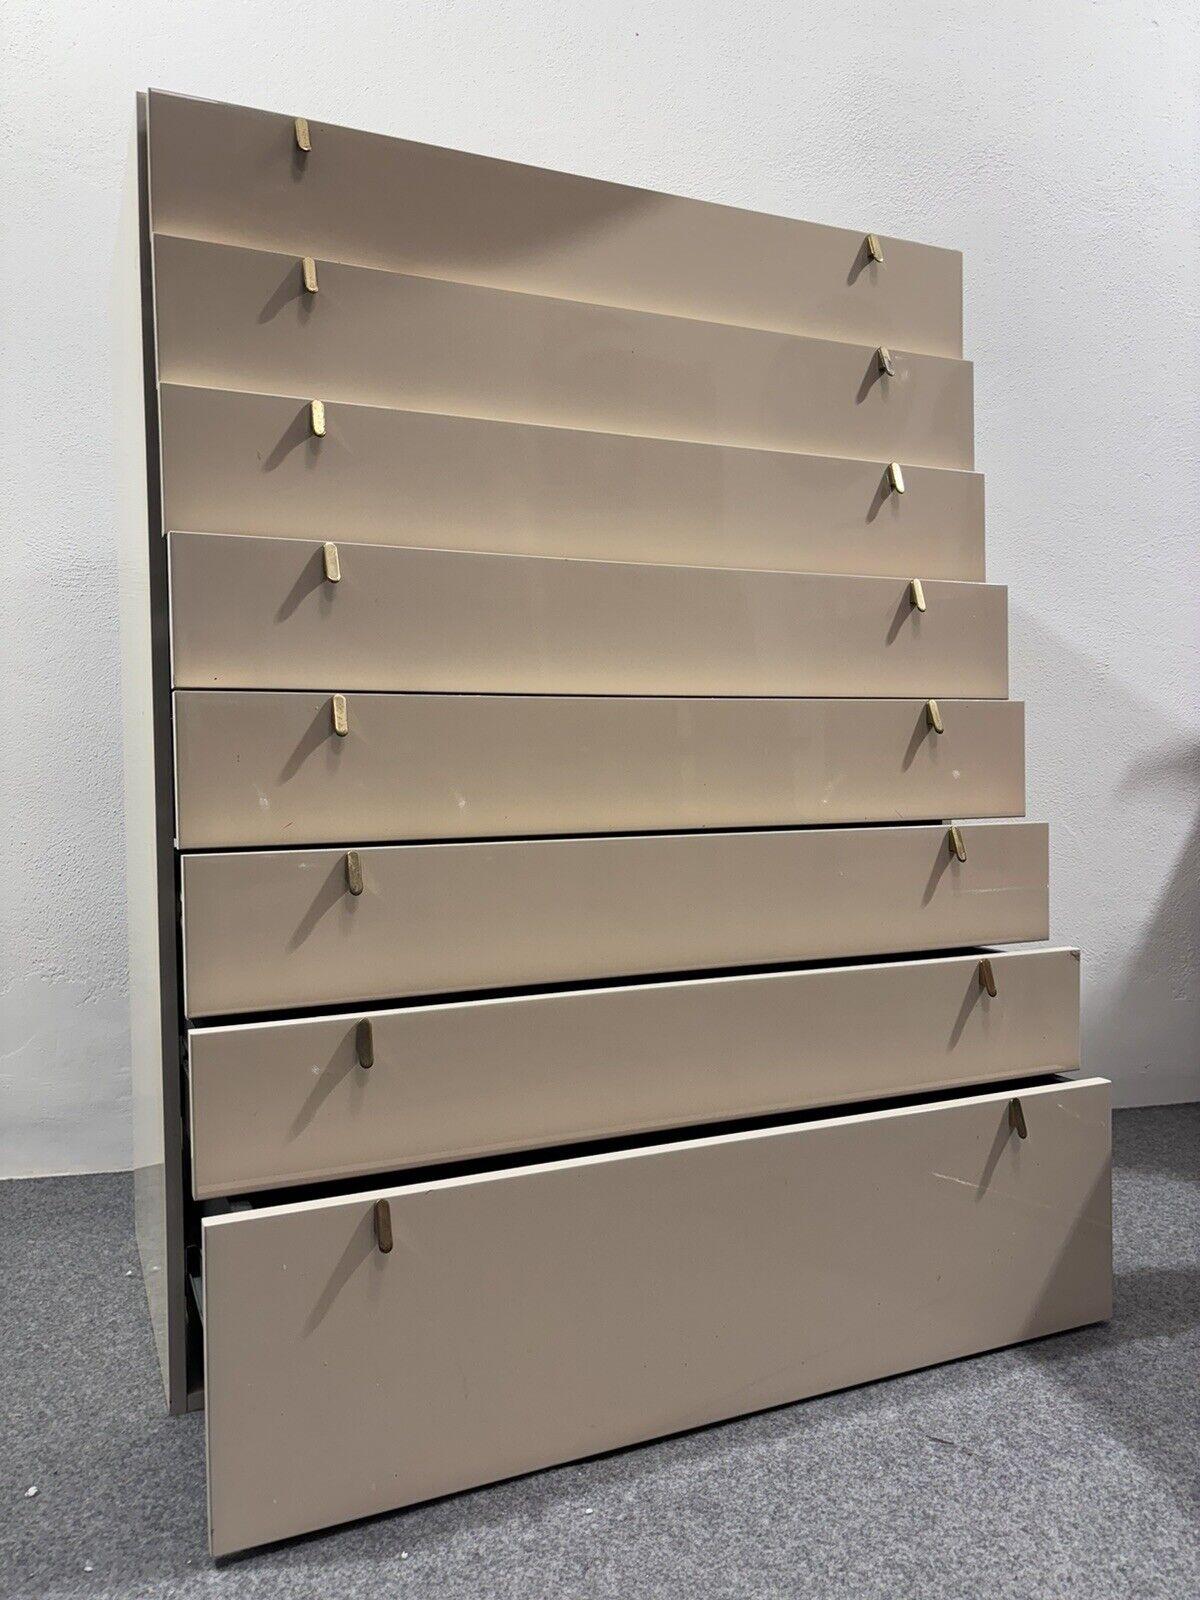 George Coslin Chest of Drawers Longato Henna 1970s Modern Design For Sale 2